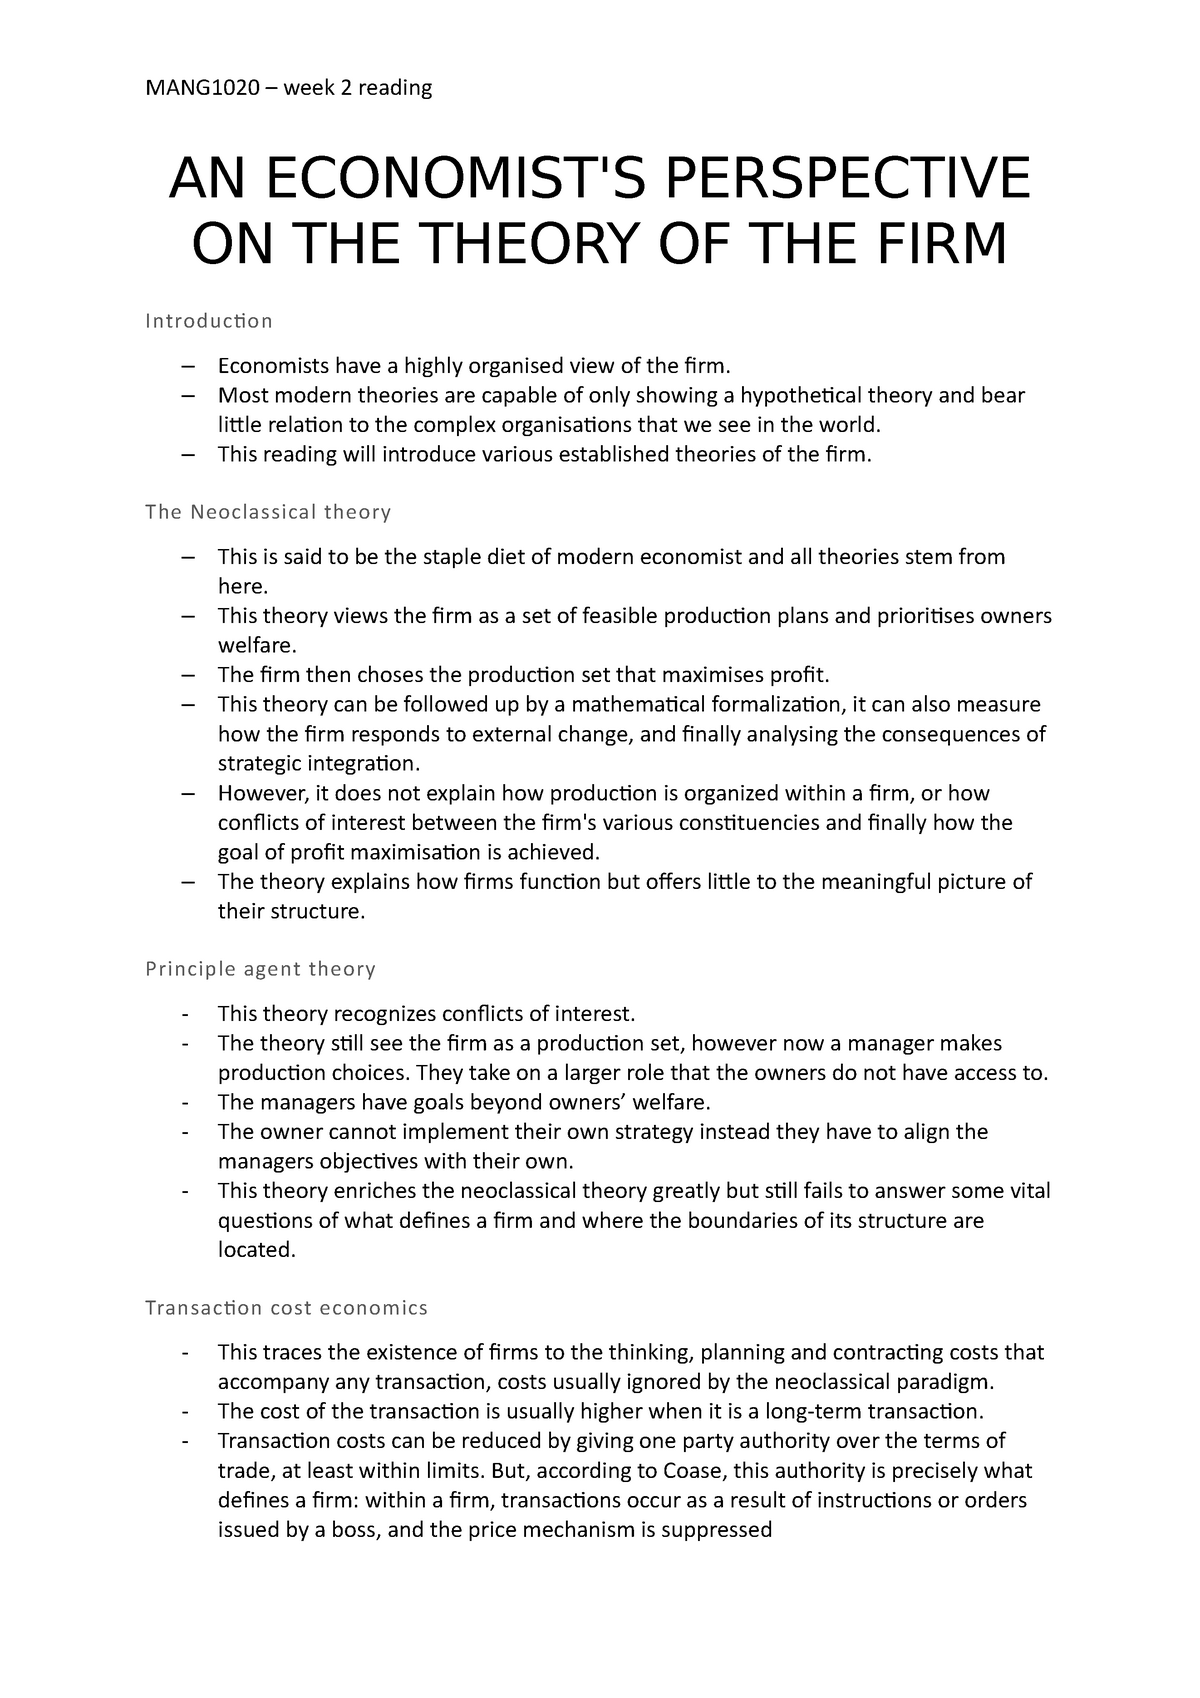 literature review theory of the firm